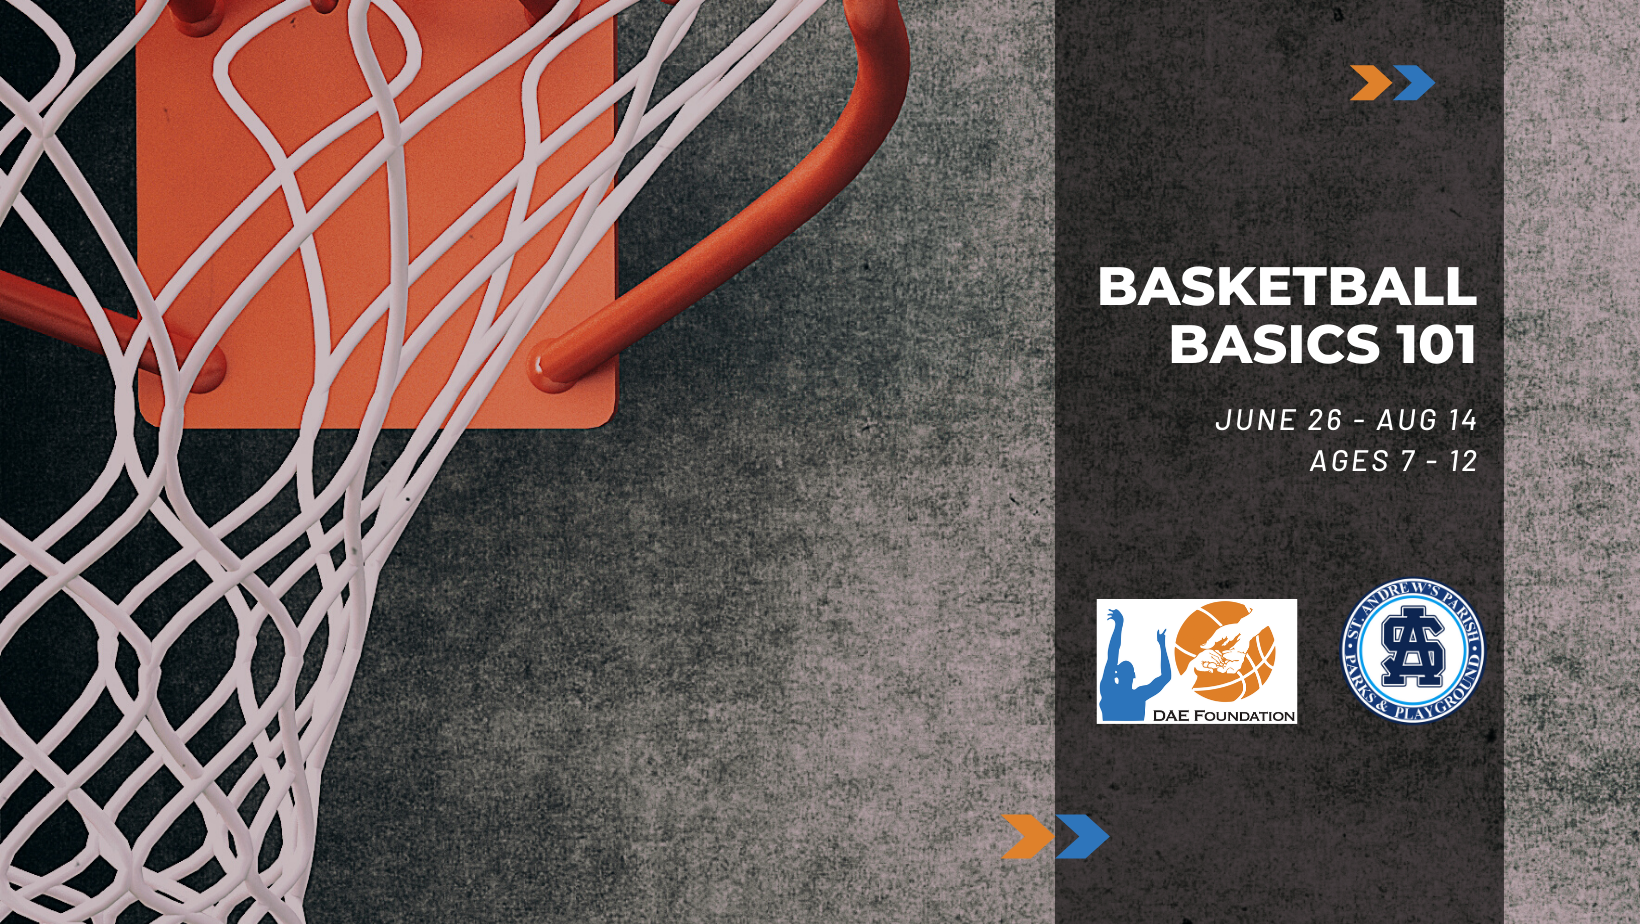 Basketball Basics 101 for Ages 7 to 12 @ St. Andrew's Gymnasium - St. Andrew's Gym Full Court